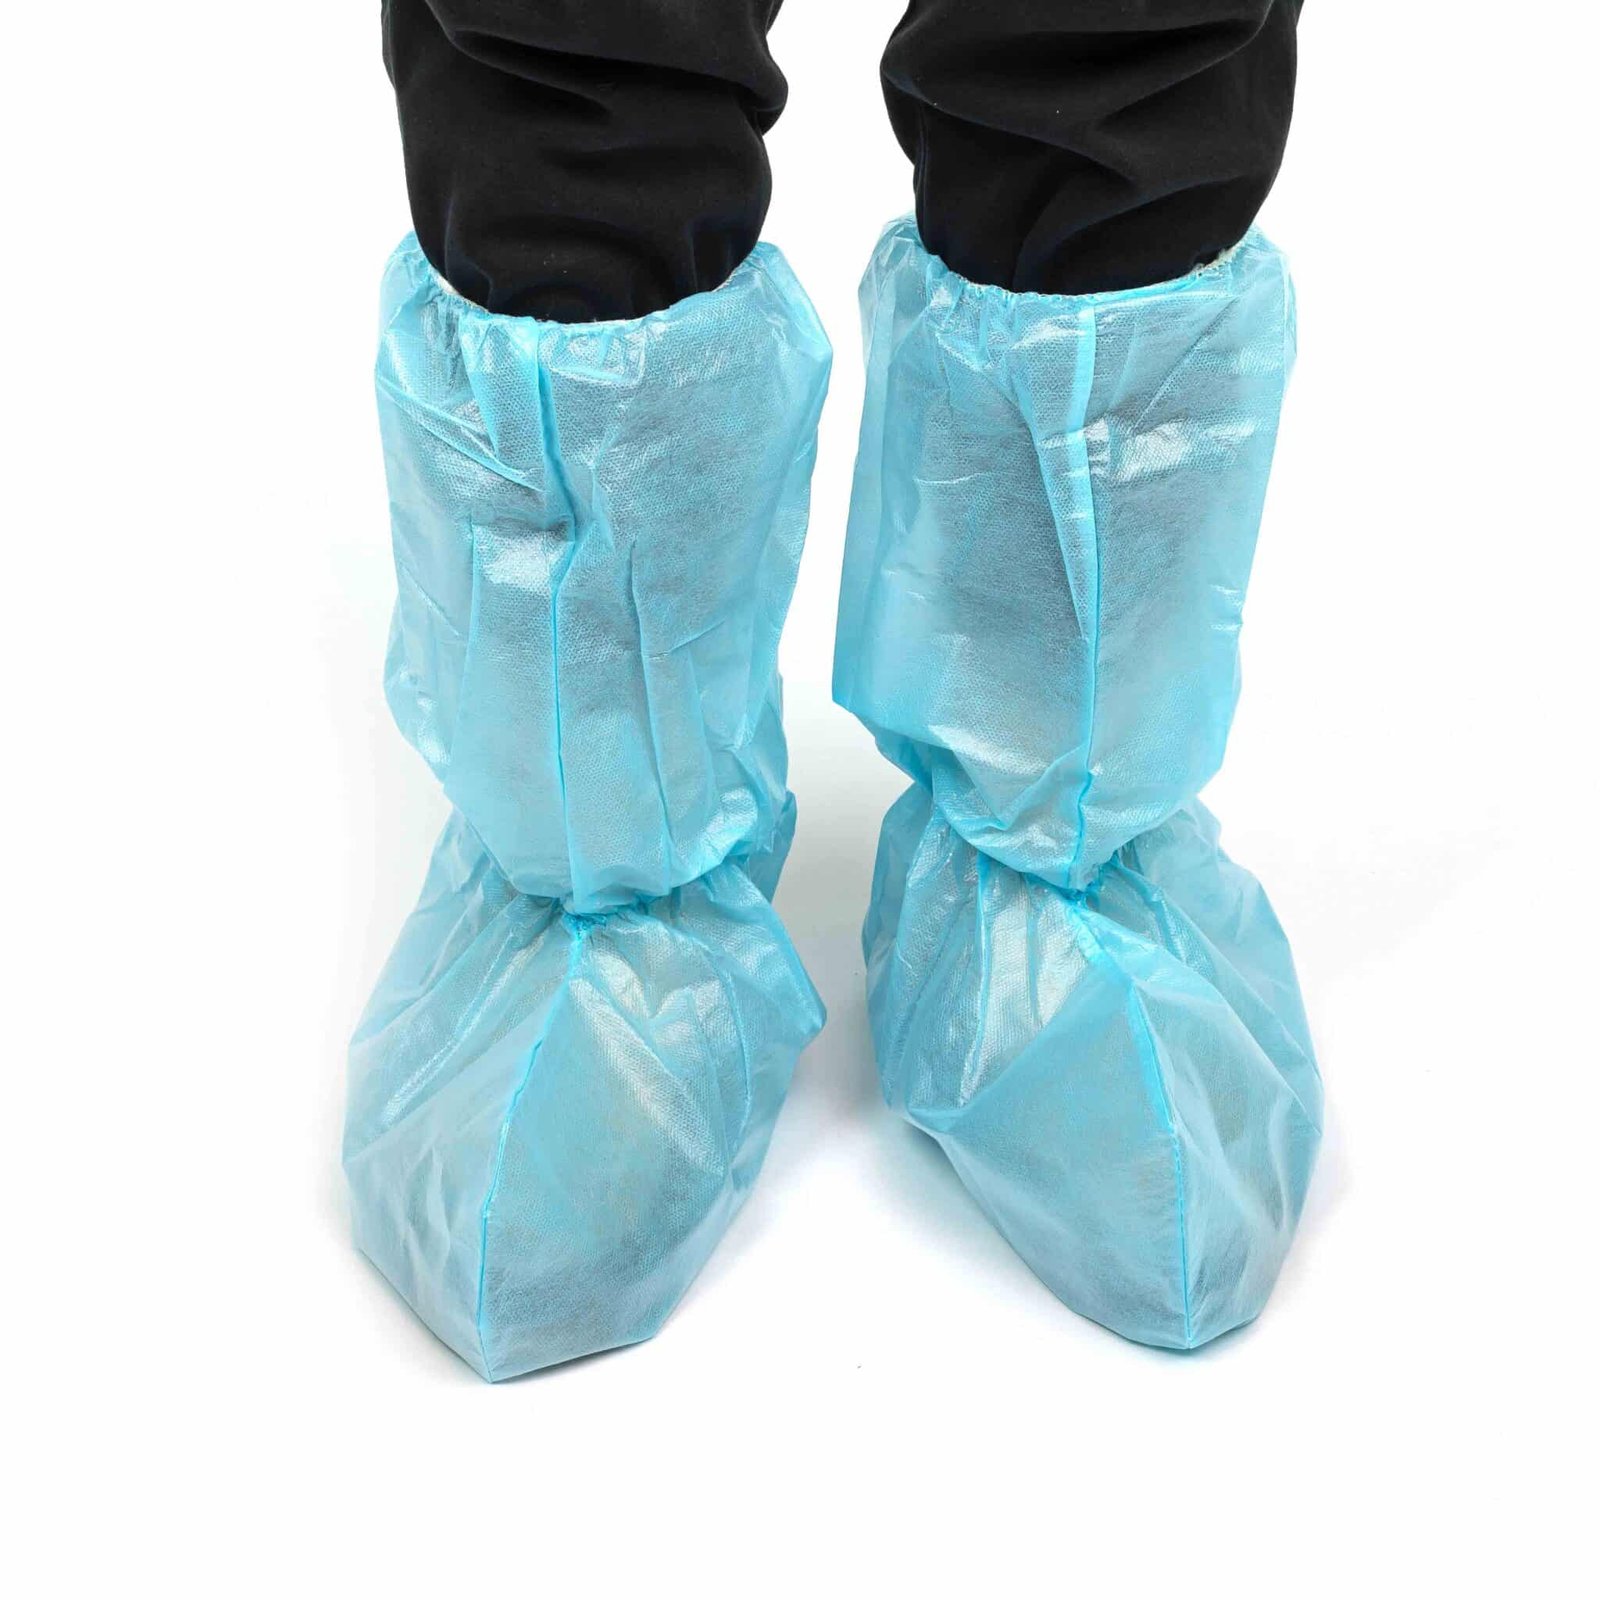 Disposable non woven anti-skid boot cover - YouFu Medical